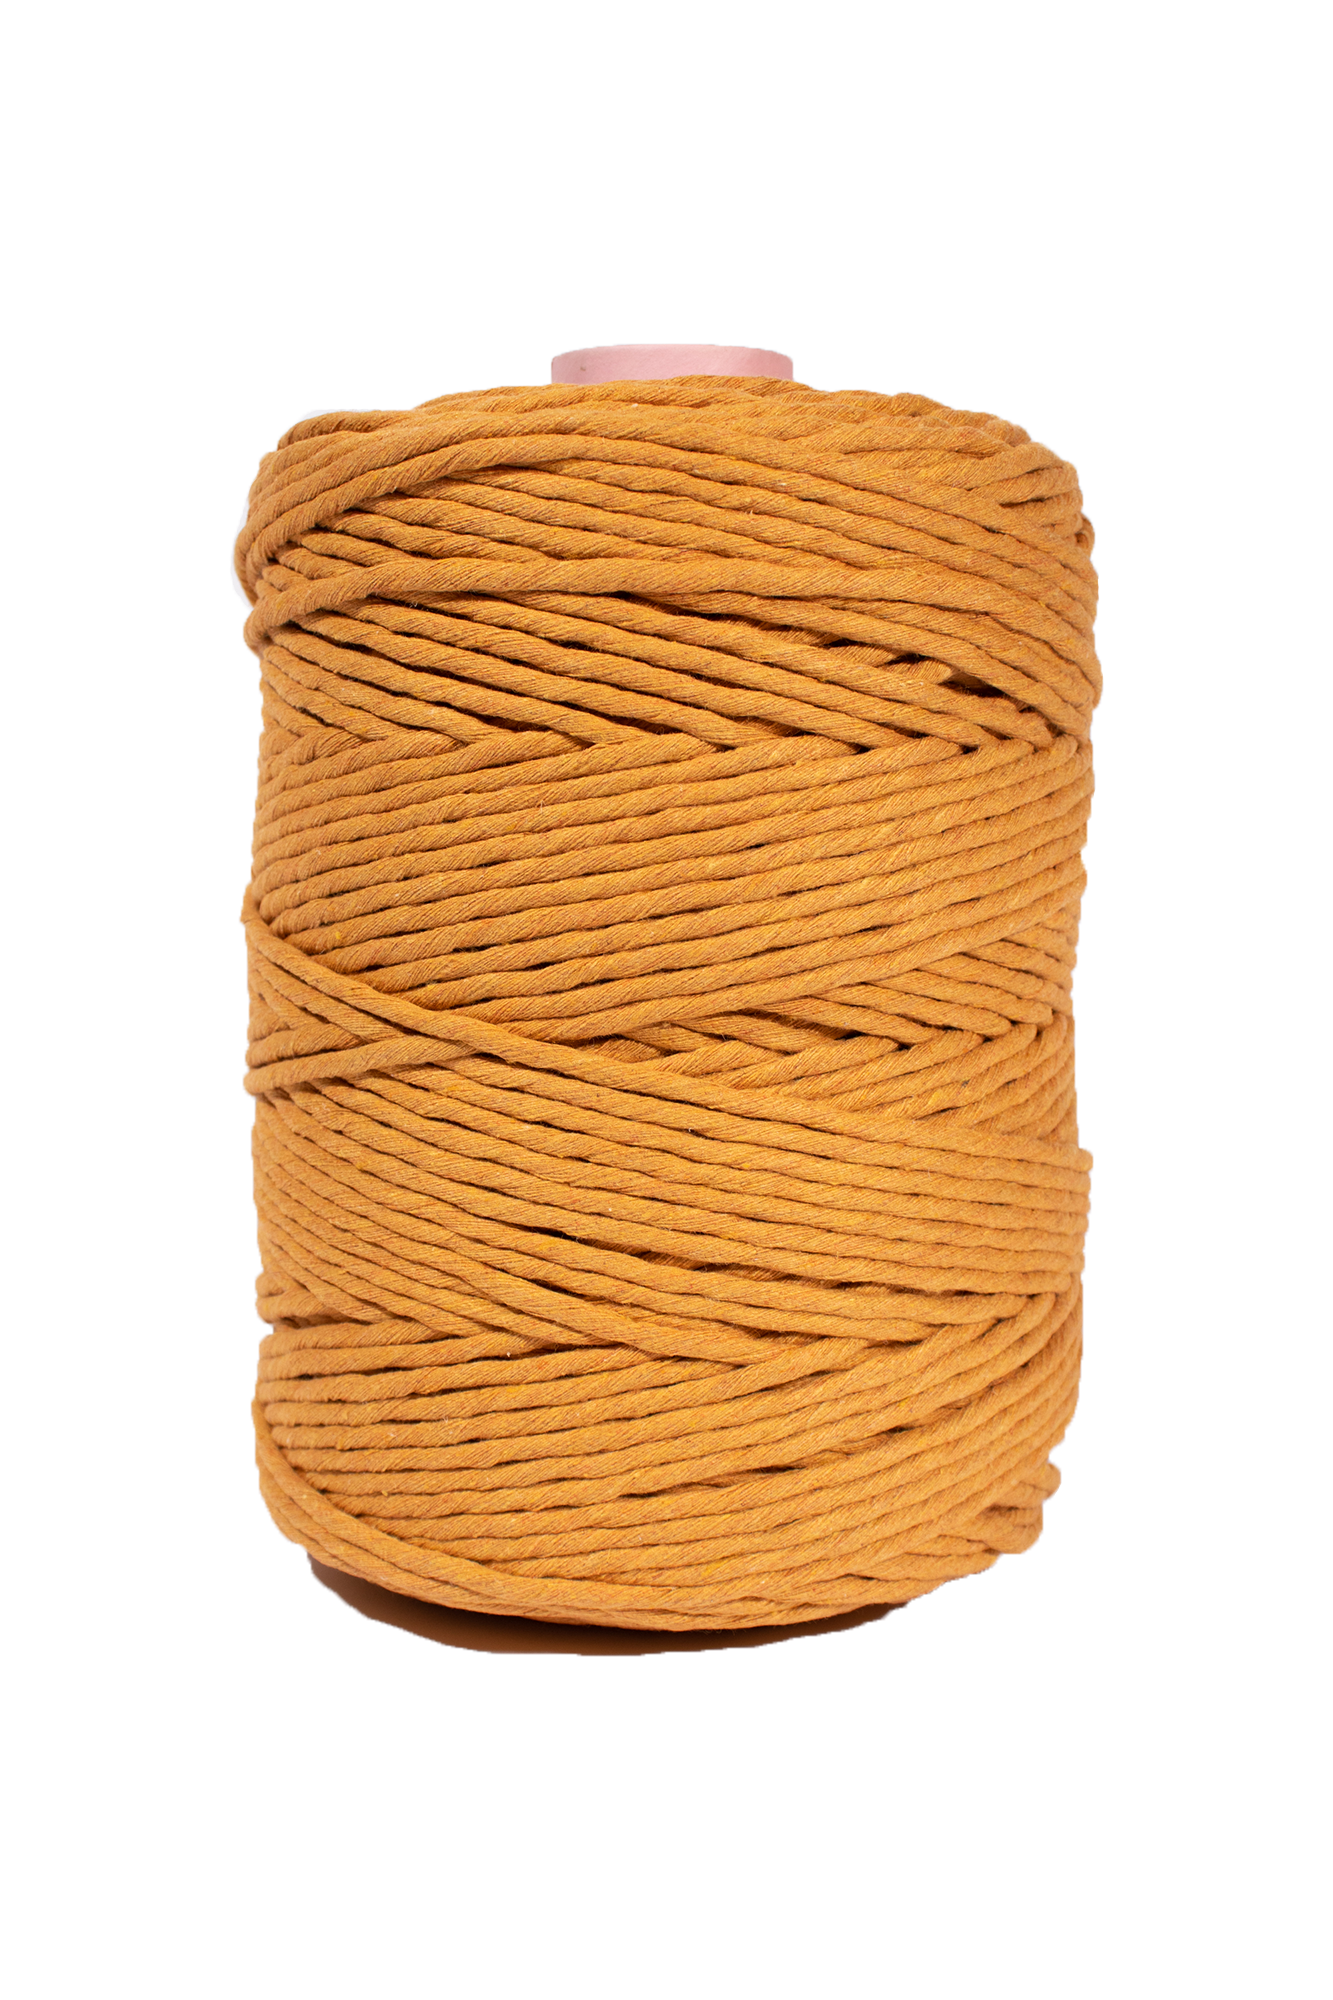 4mm 100% Recycled Cotton Cord - 800ft Spool